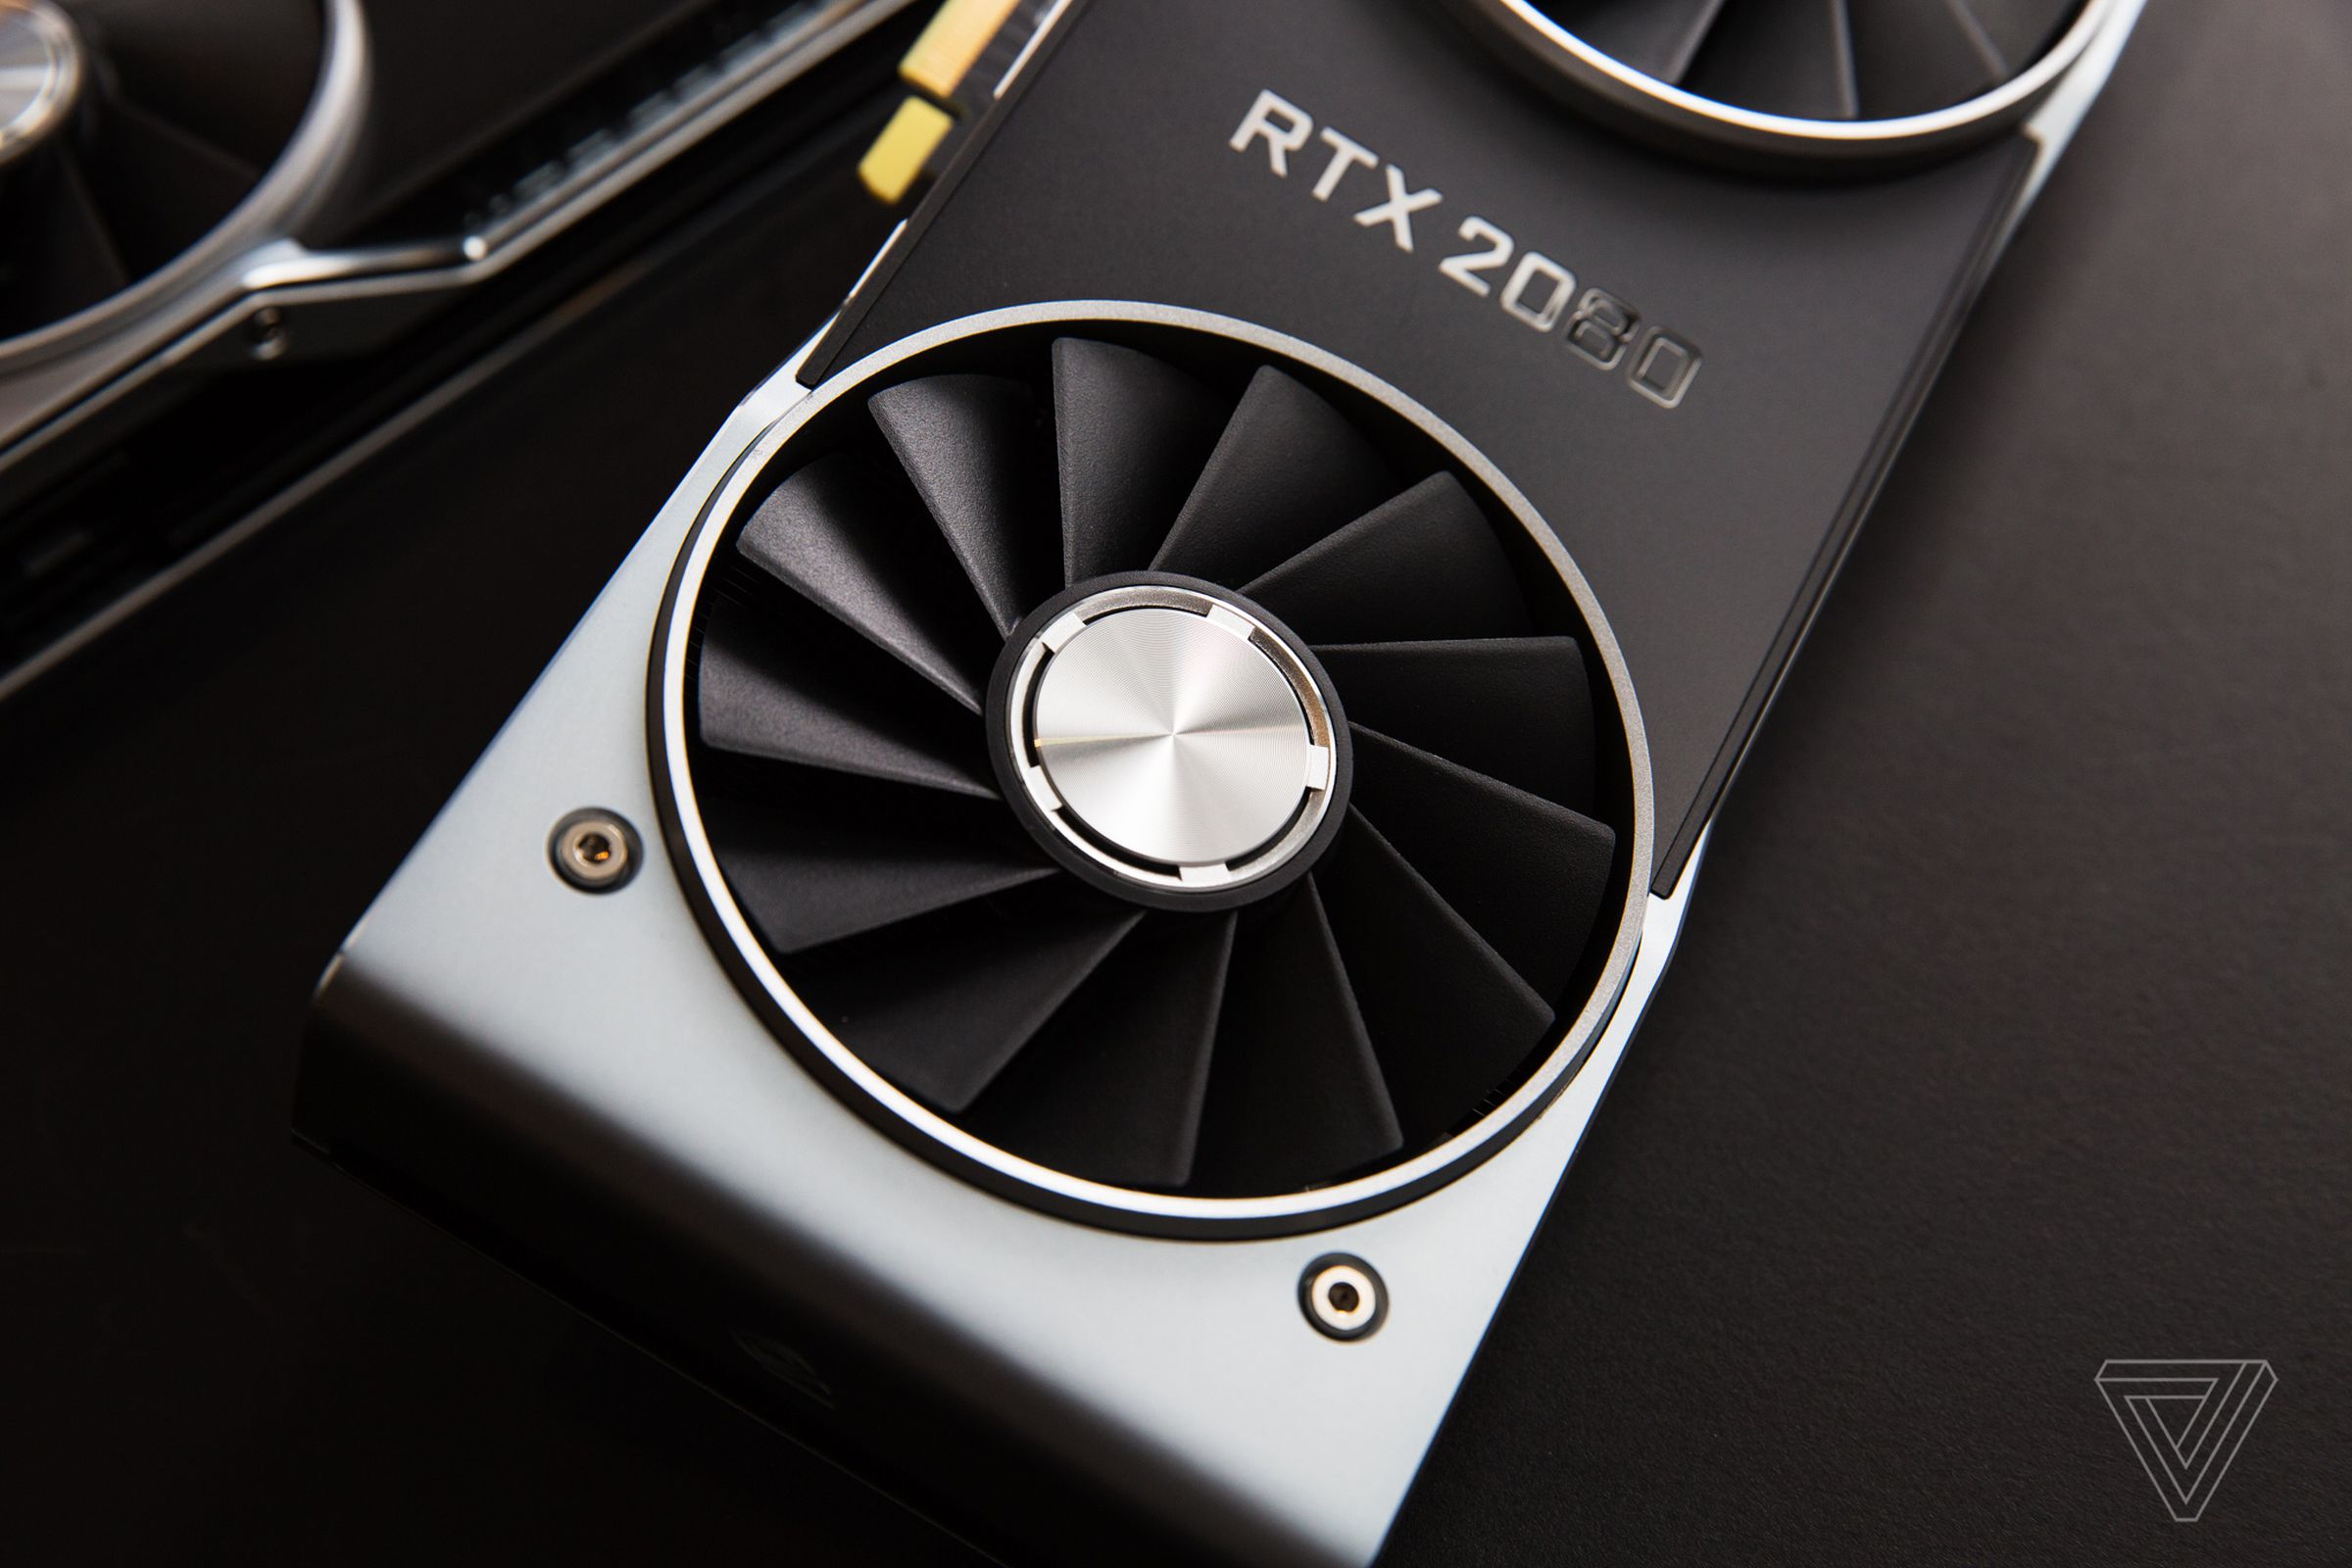 Unfortunately, Zotac’s RTX 2080 doesn’t look as cool